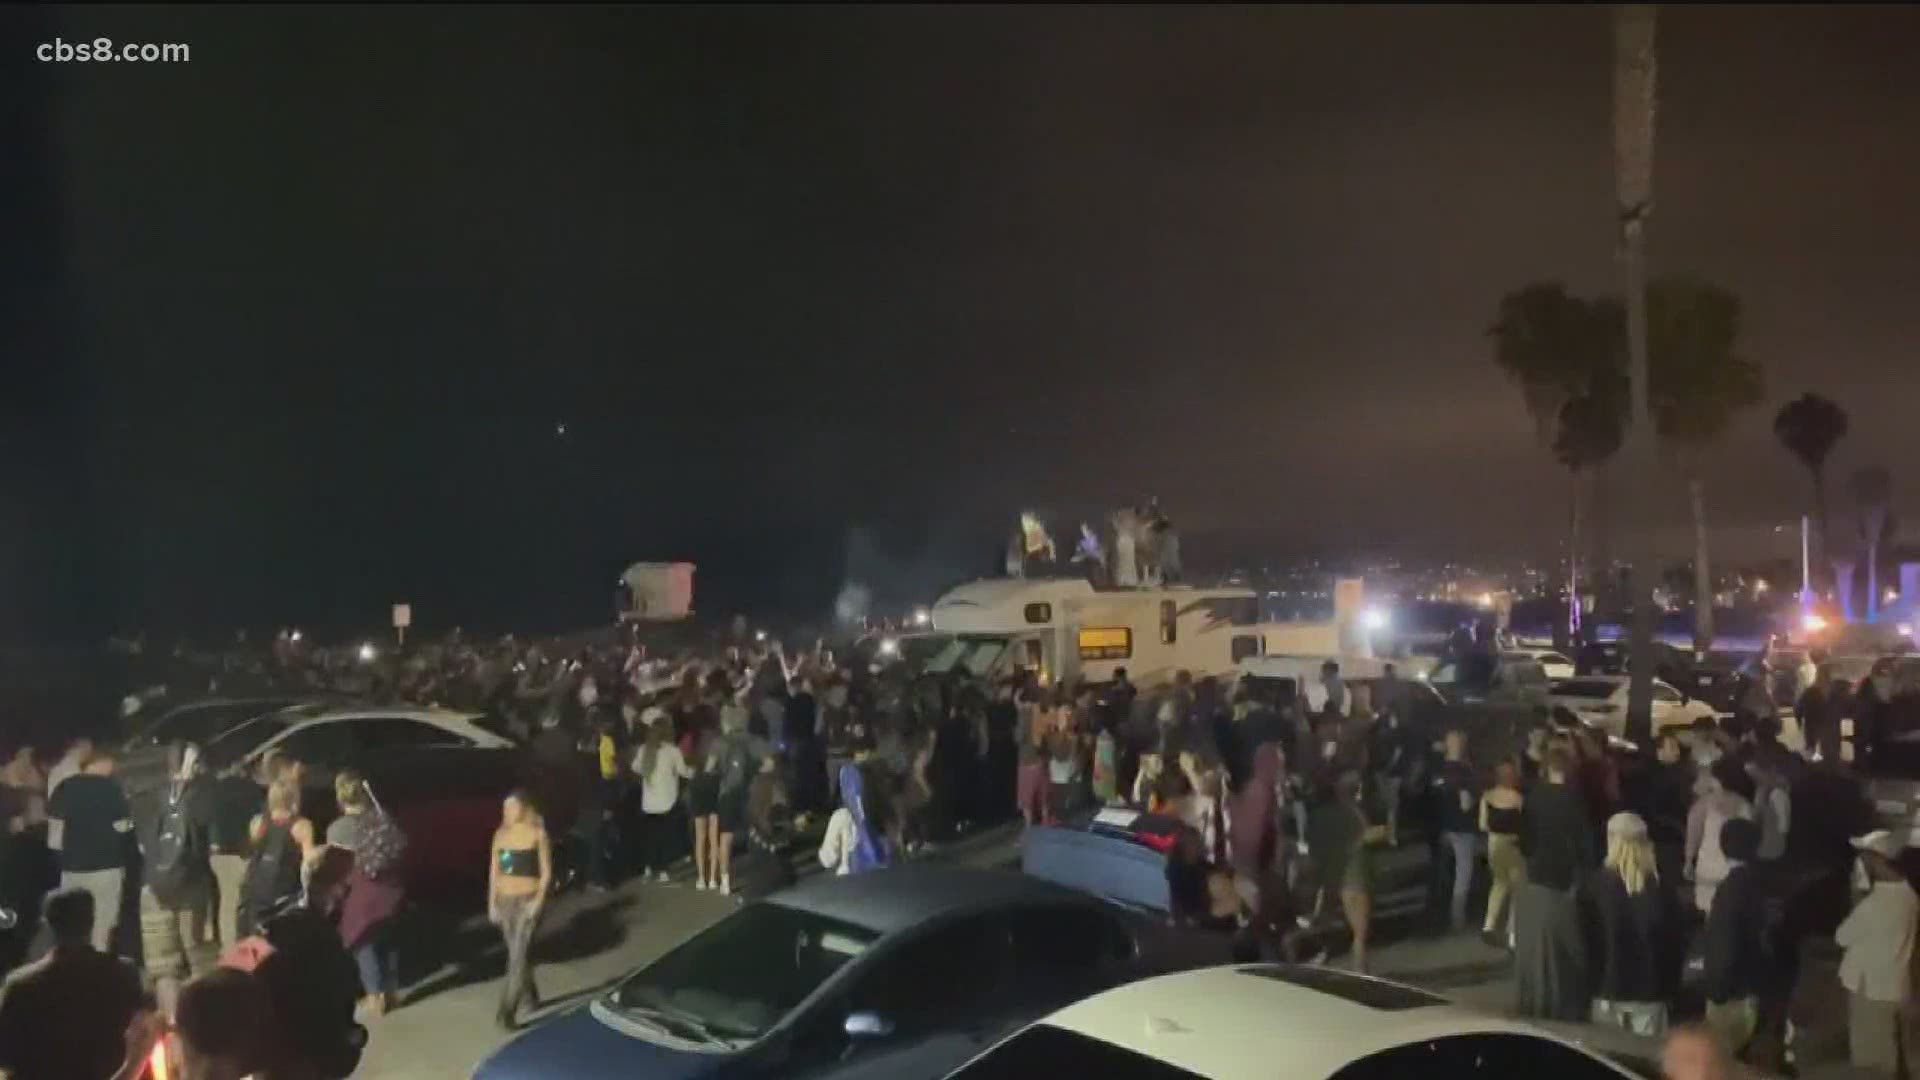 San Diego police break up crowds after complaints over large weekly gatherings in Ocean Beach